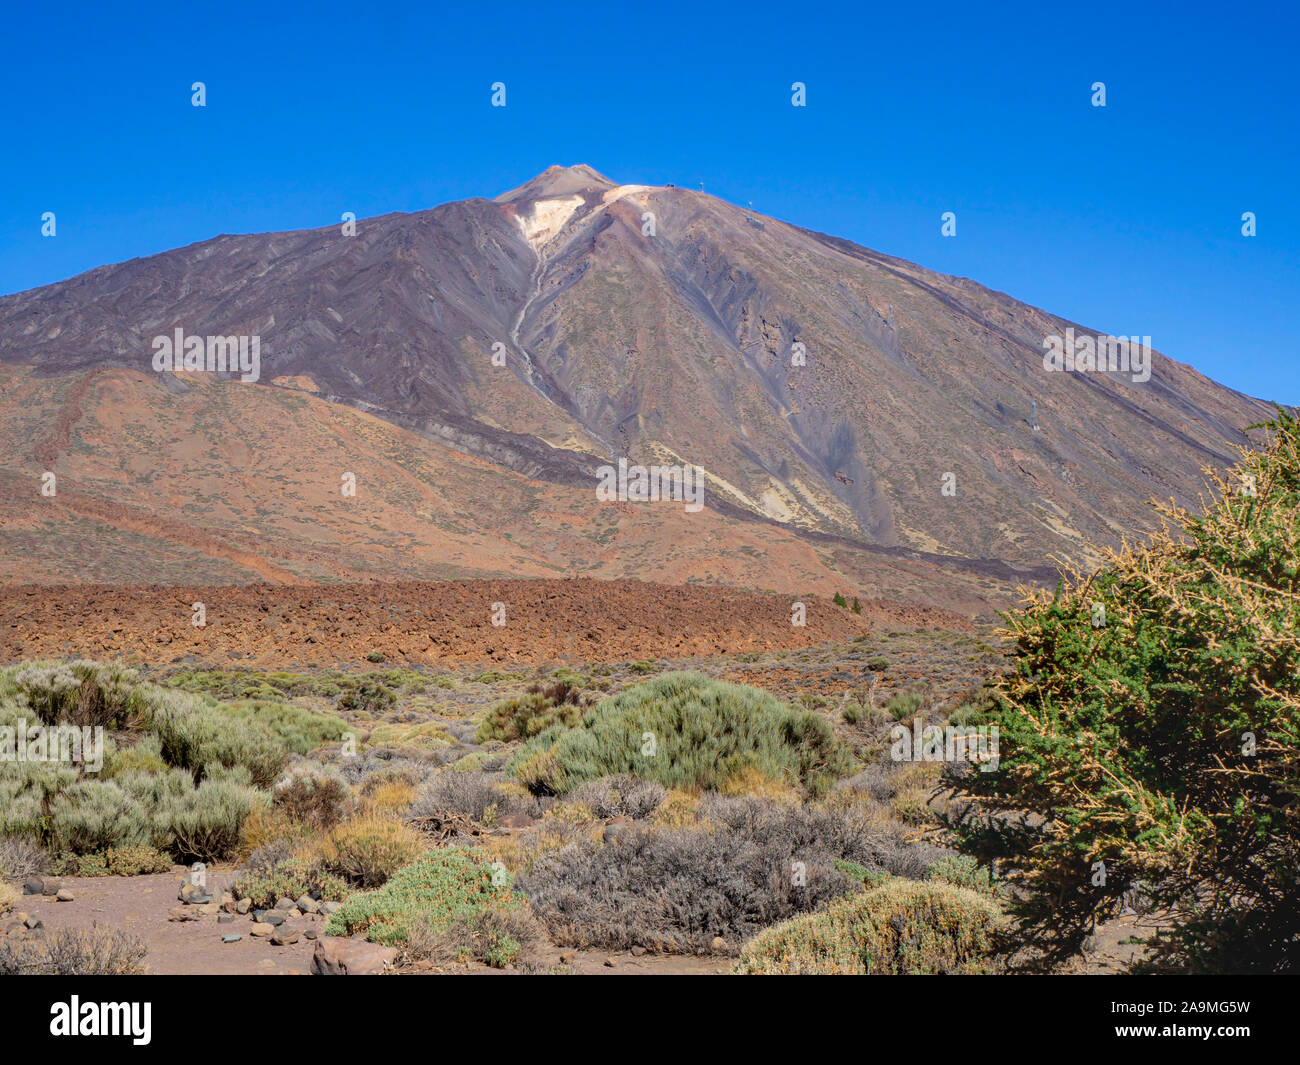 Teide National Park in Tenerife with a great view of Mount Teide volcano, Canary Islands, Spain Stock Photo